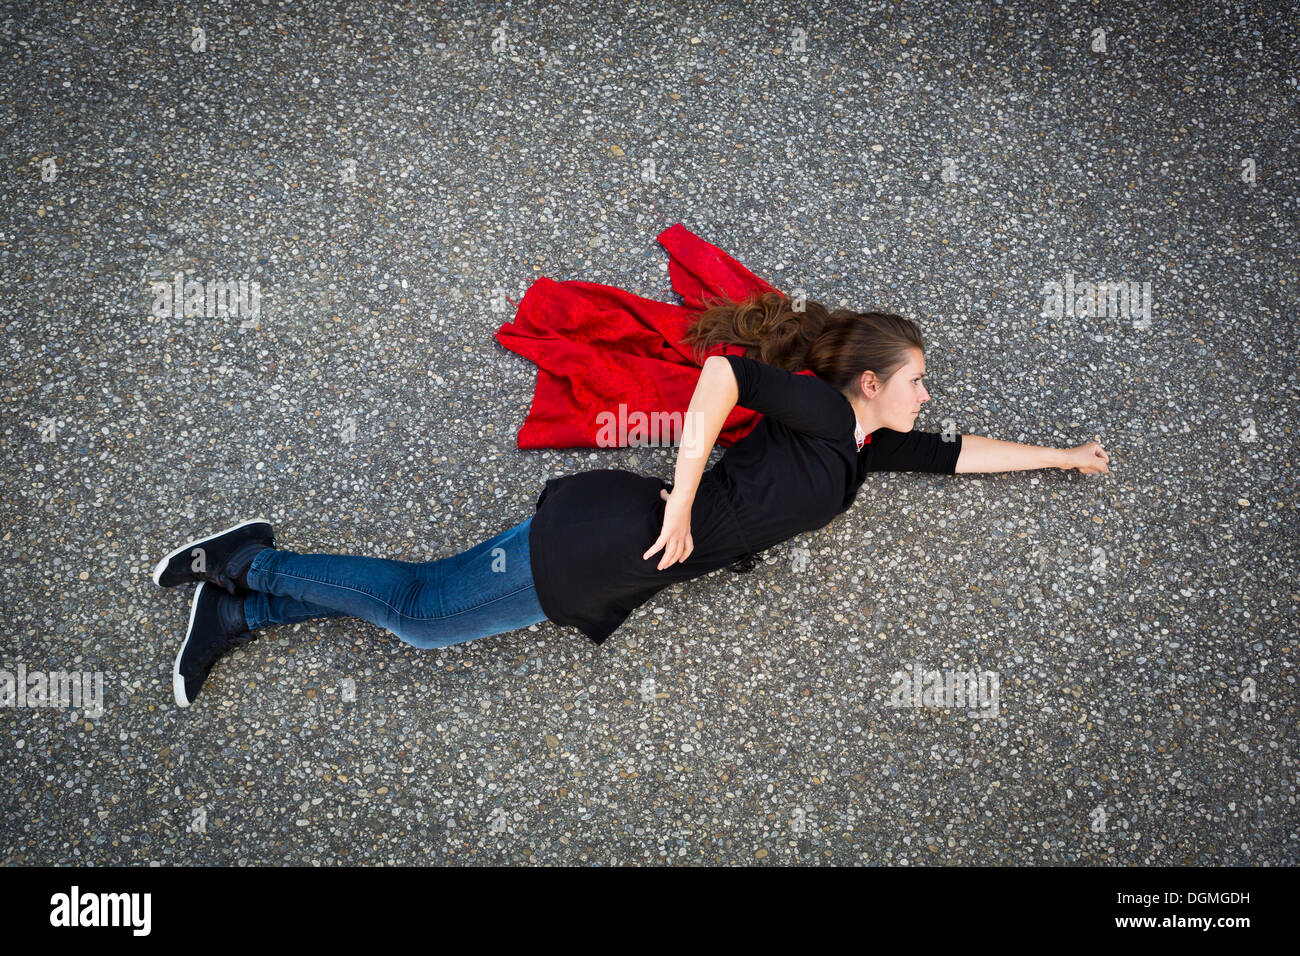 Young woman appearing to fly in a Superman or Supergirl position, taken from above Stock Photo